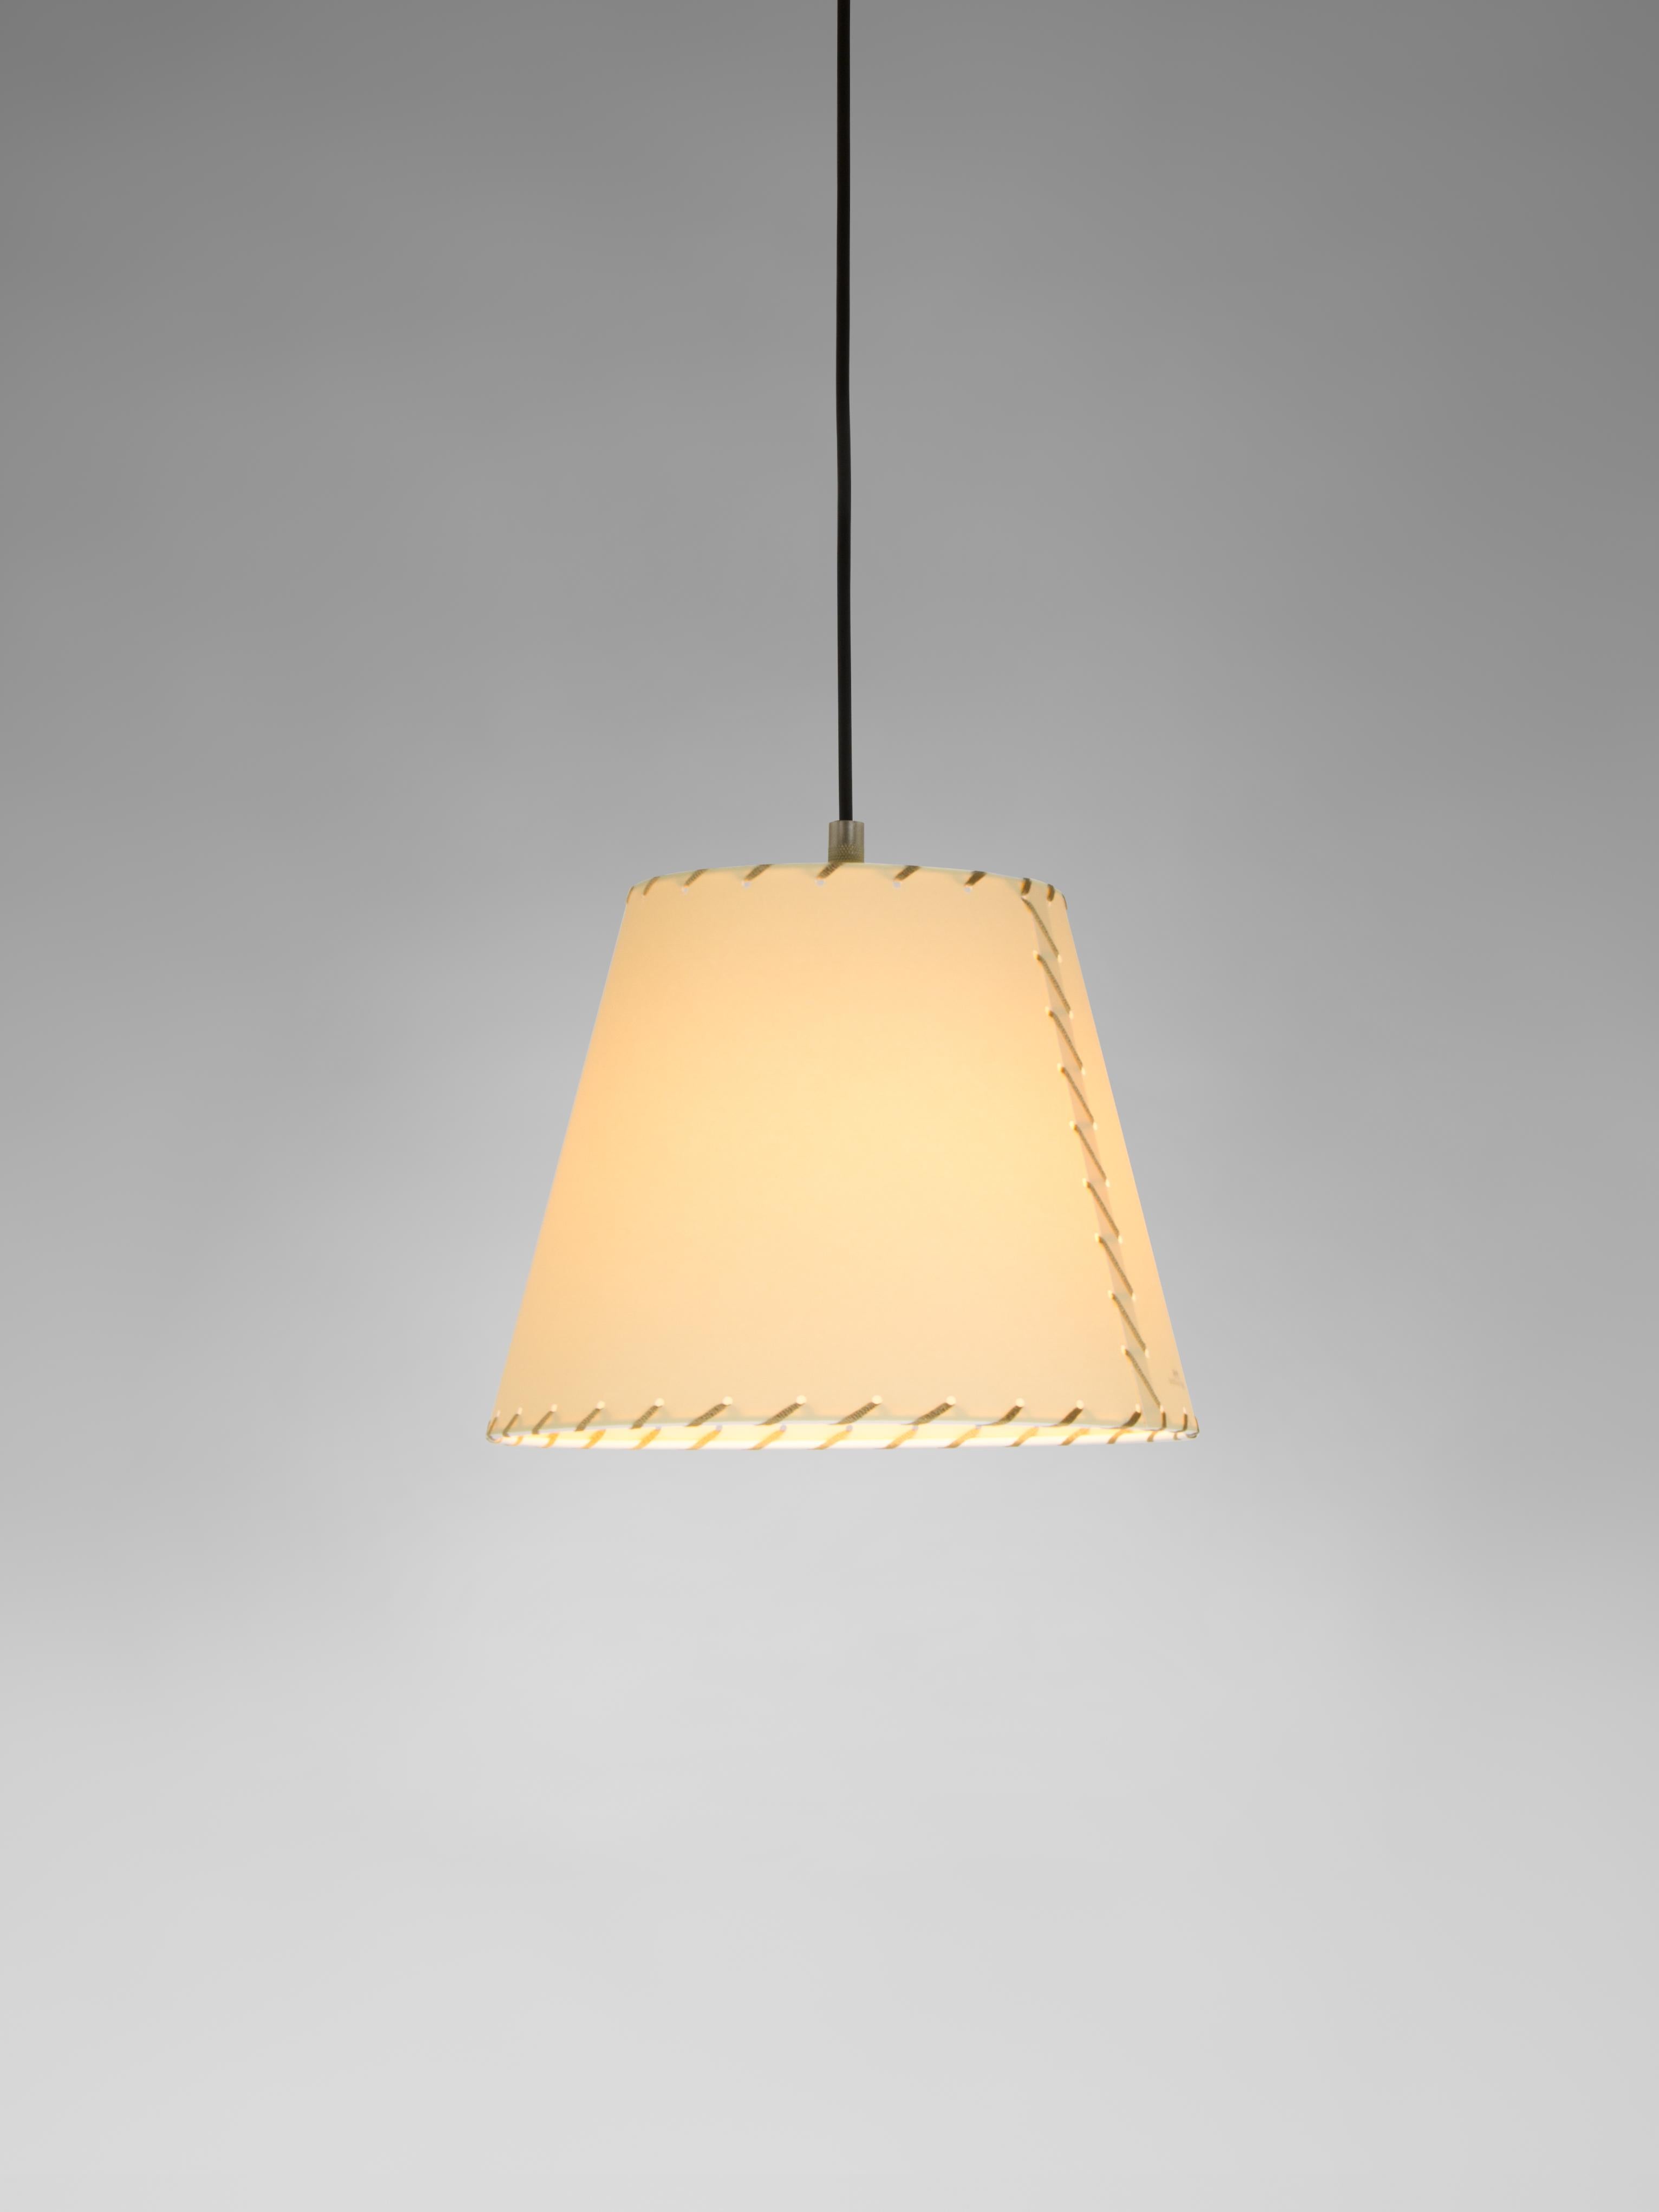 Beige Sísísí Cónicas MT1 pendant lamp by Santa & Cole
Dimensions: D 25 x H 20 cm
Materials: Metal, stitched parchment.
Available in other colors.

The conical shape group has multiple finishes and sizes. It consists of four sizes: PT1, MT1, GT1